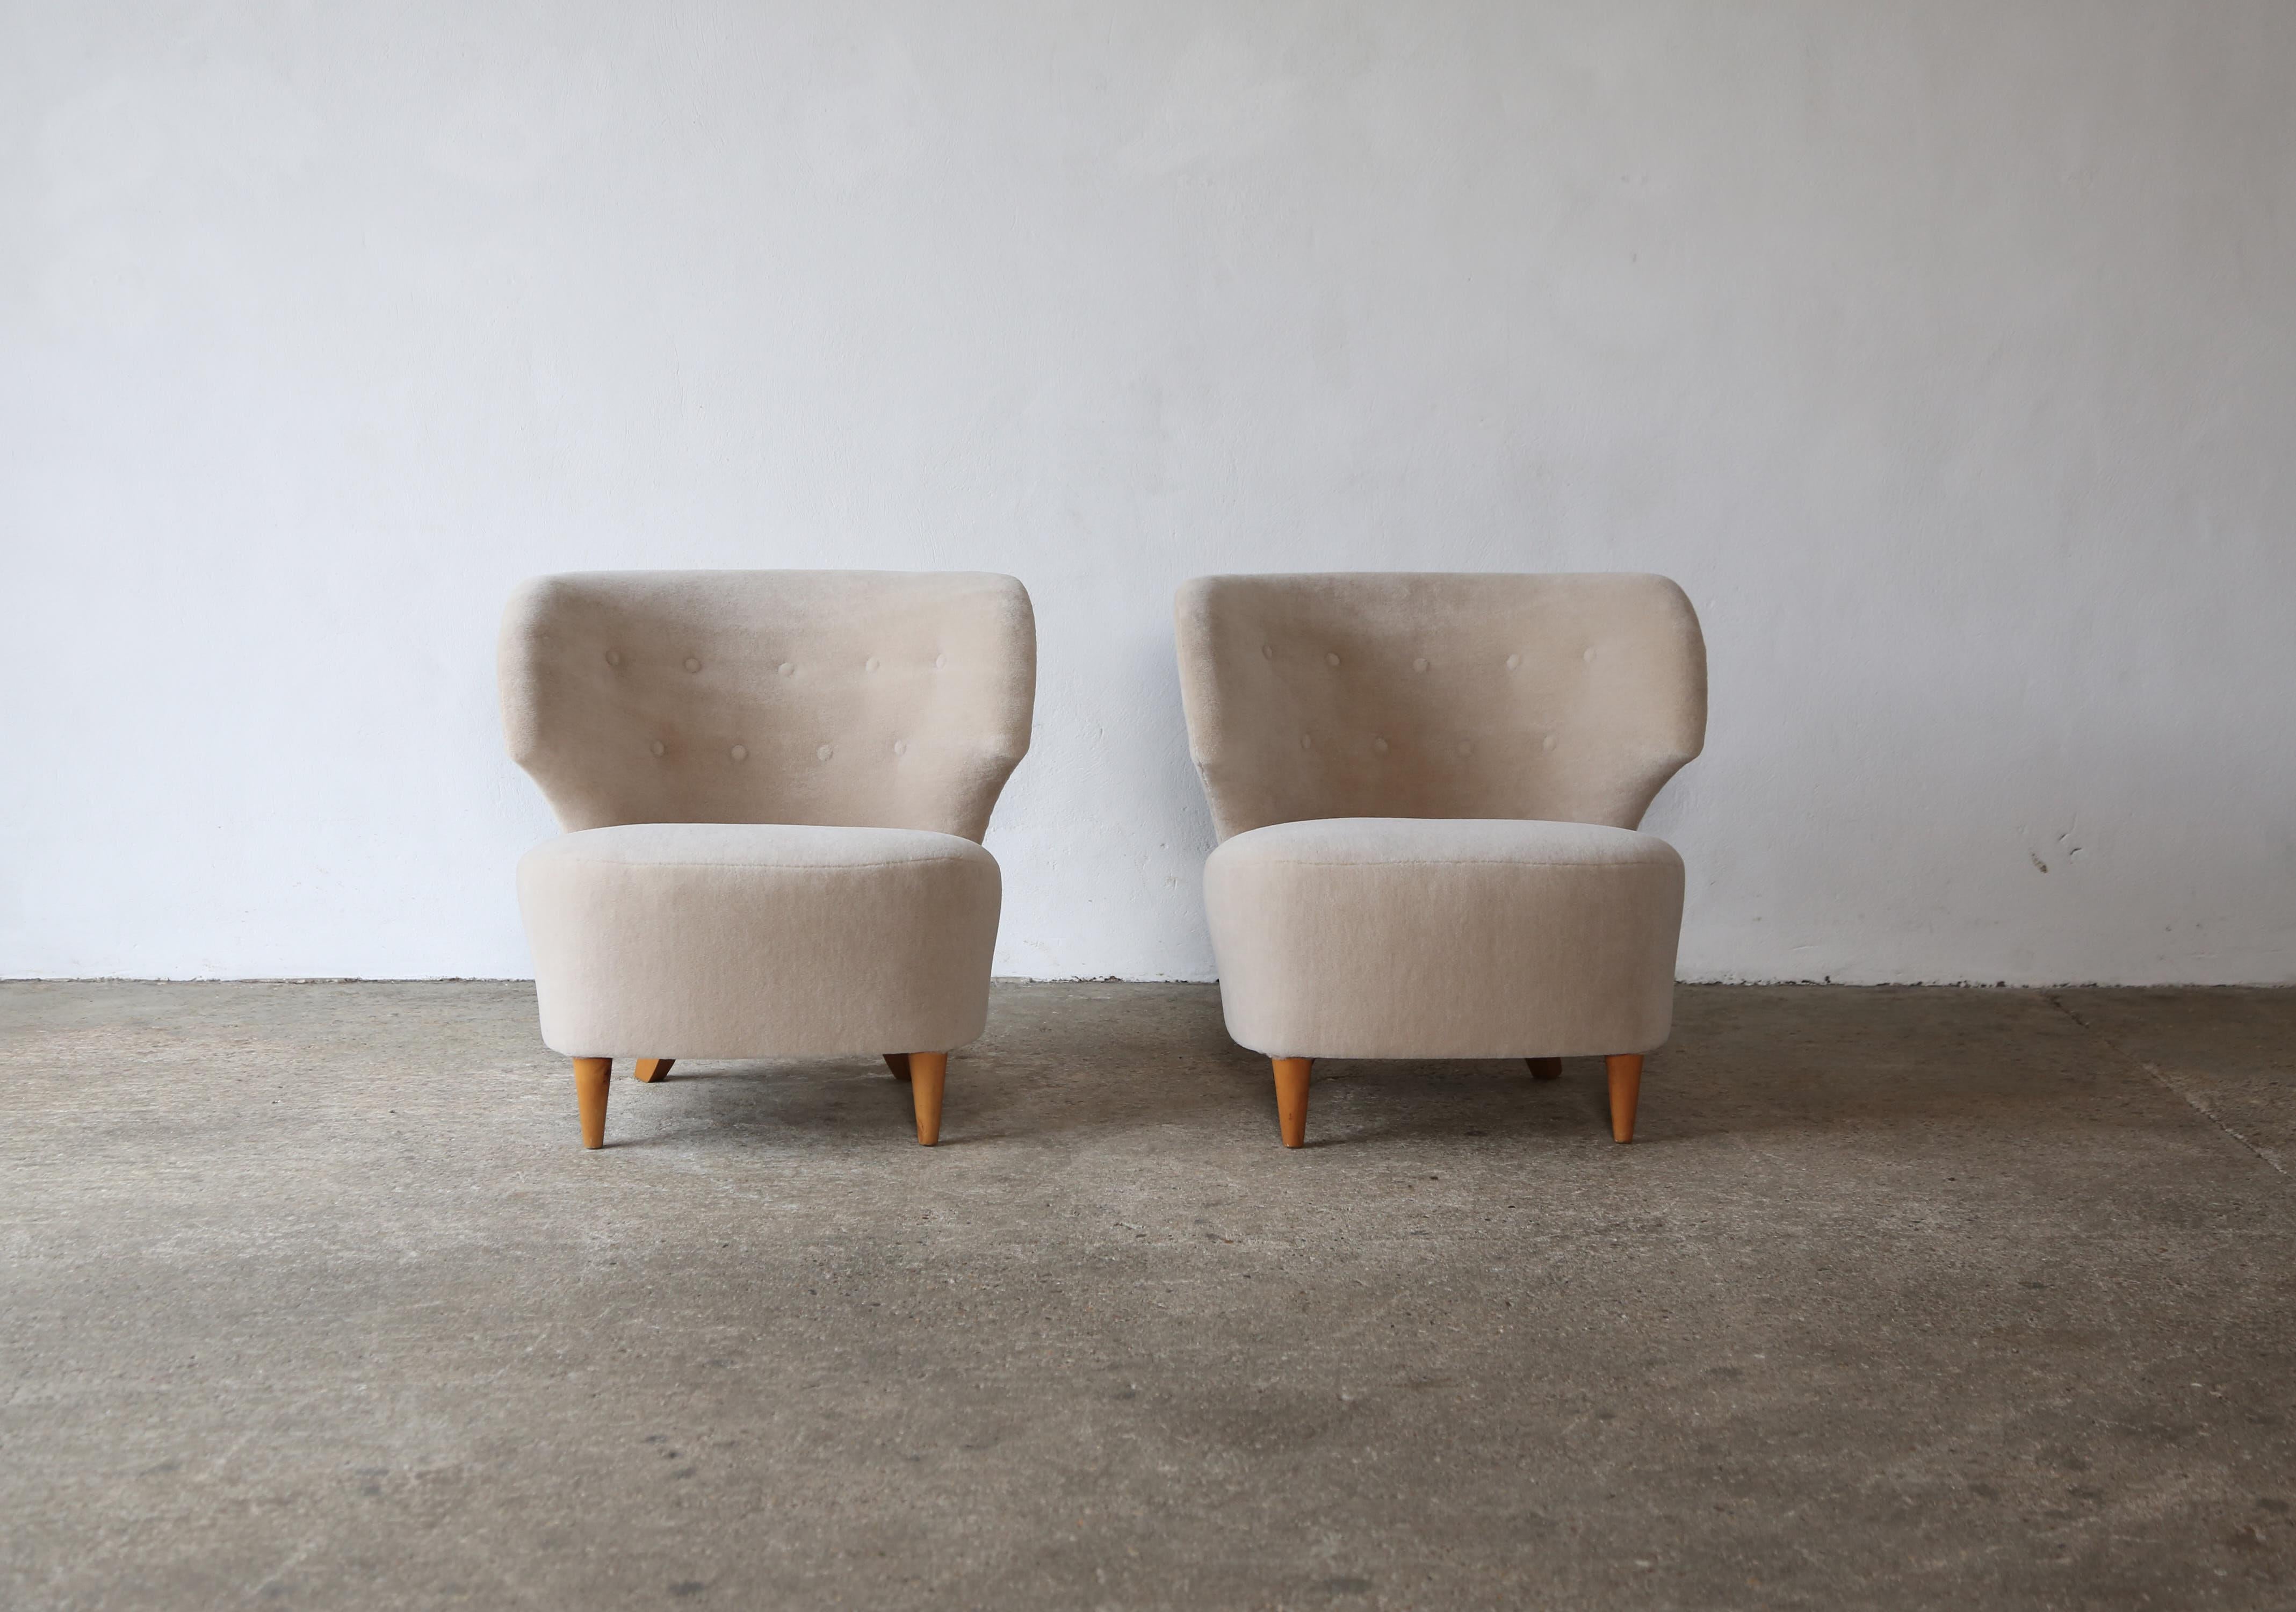 Pair of Carl-Johan Boman Chairs, Finland, 1940s, Newly Upholstered in Alpaca For Sale 5